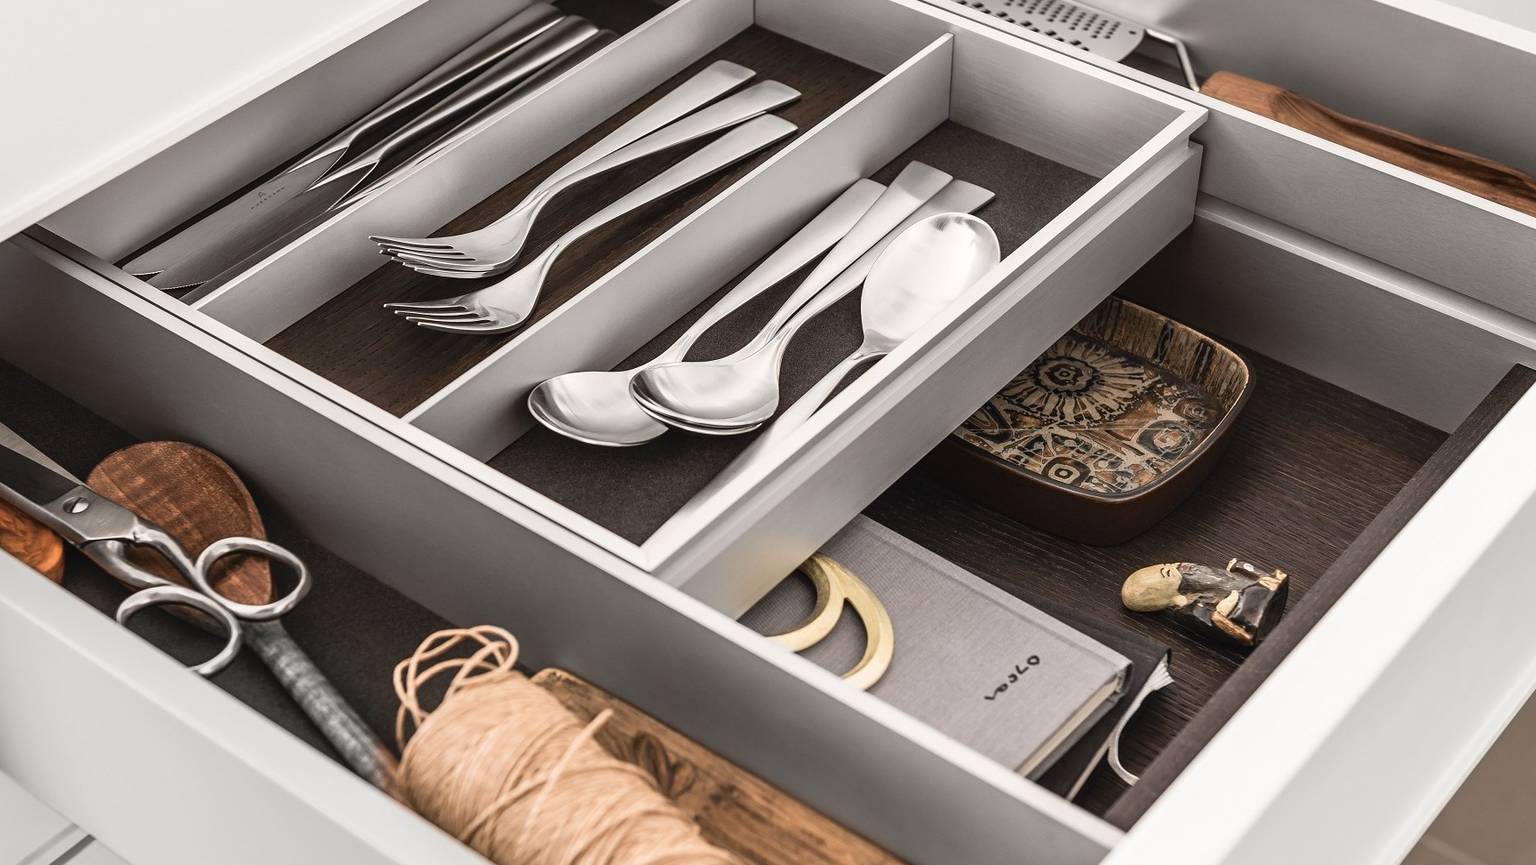 A bi-level drawer elegantly doubles storage space in SieMatic kitchen drawers and pull-outs